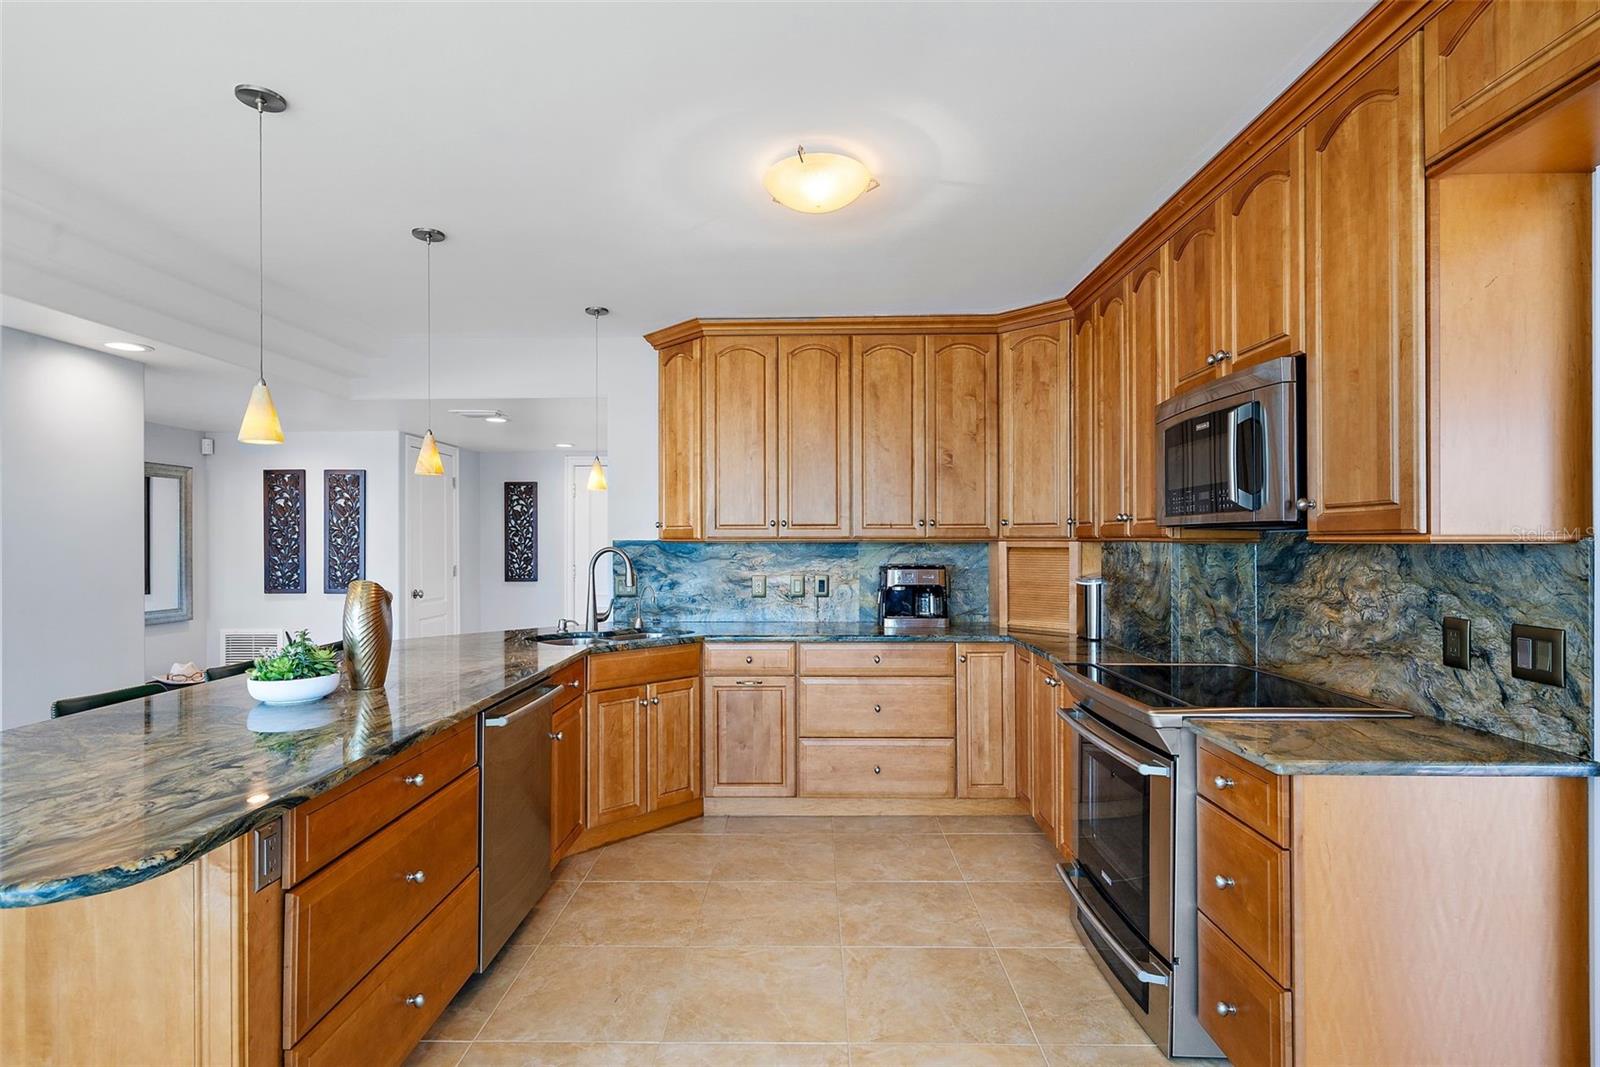 The solid wood cabinetry and beautiful stone countertops/backsplash are timeless.